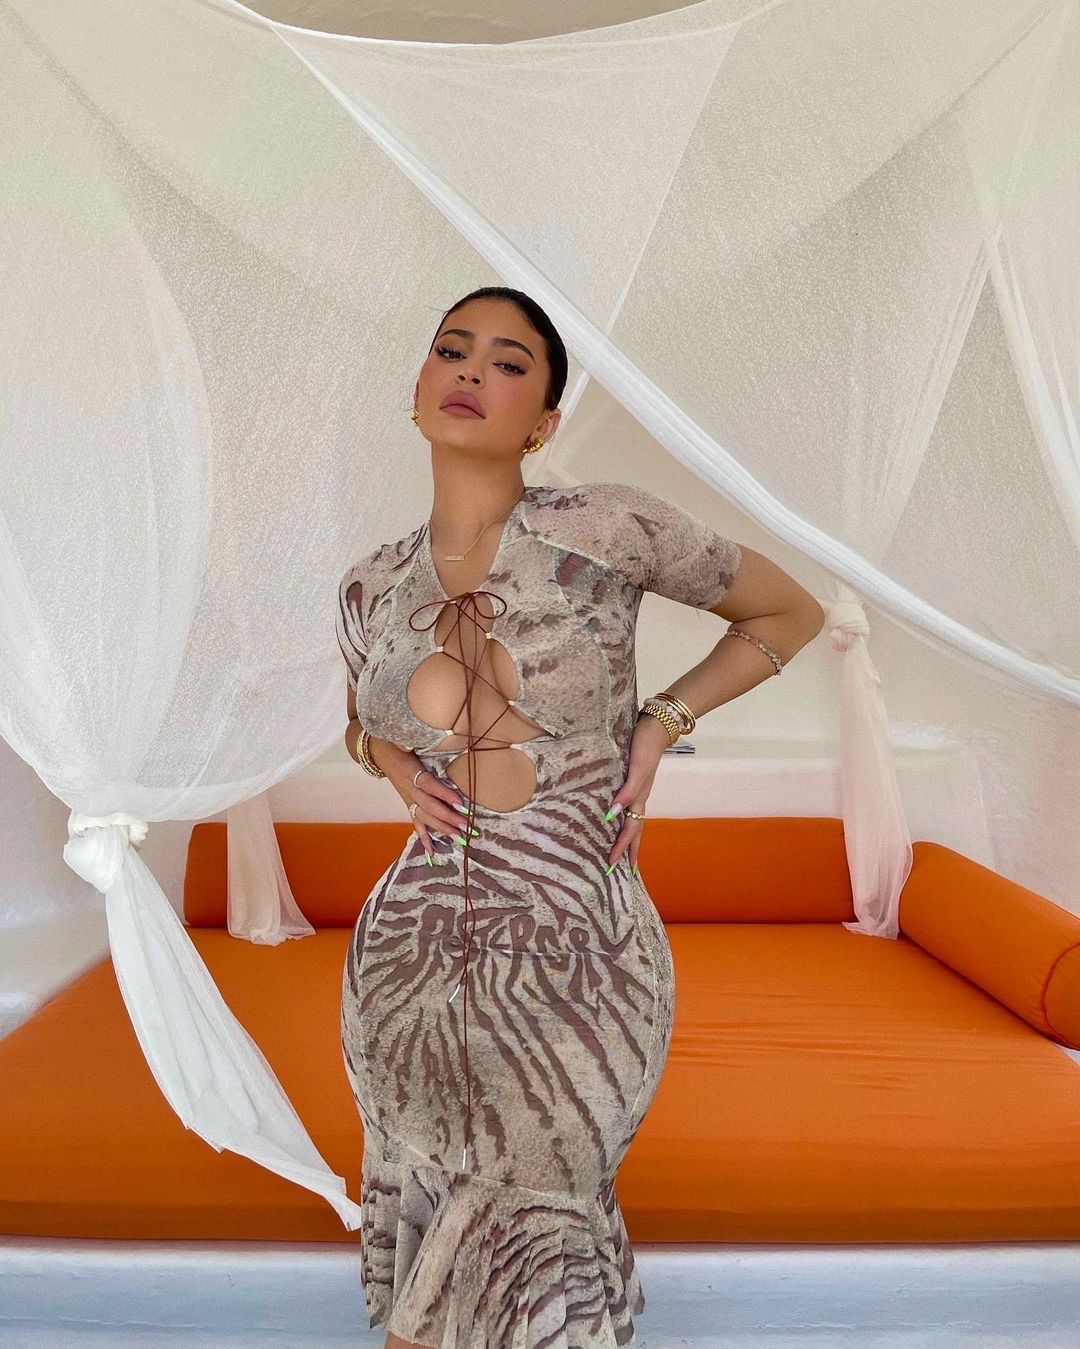 Kylie Jenner showcases her toned curves and ample cleavage in bodycondress